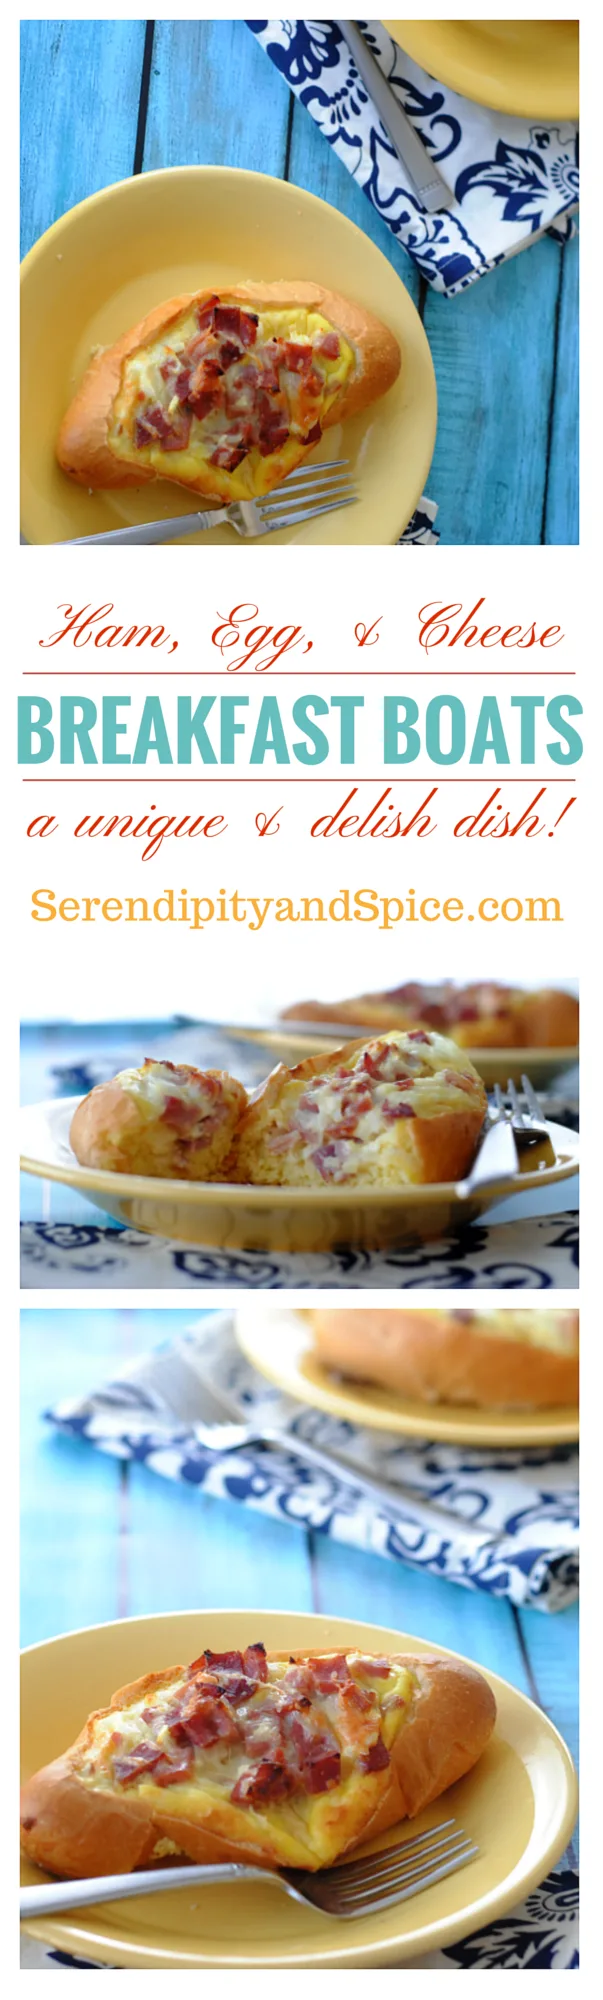 Breakfast Boats Collage AMAZING Ham, Egg, and Cheese Casserole Boats Ham egg and cheese casserole breakfast boats are a unique breakfast idea the whole family will love!  Do you ever just get tired of eating the same stuff for breakfast all the time? These ham, egg, and cheese casserole breakfast boats are a delicious and unique breakfast recipe that's a crowd pleaser!